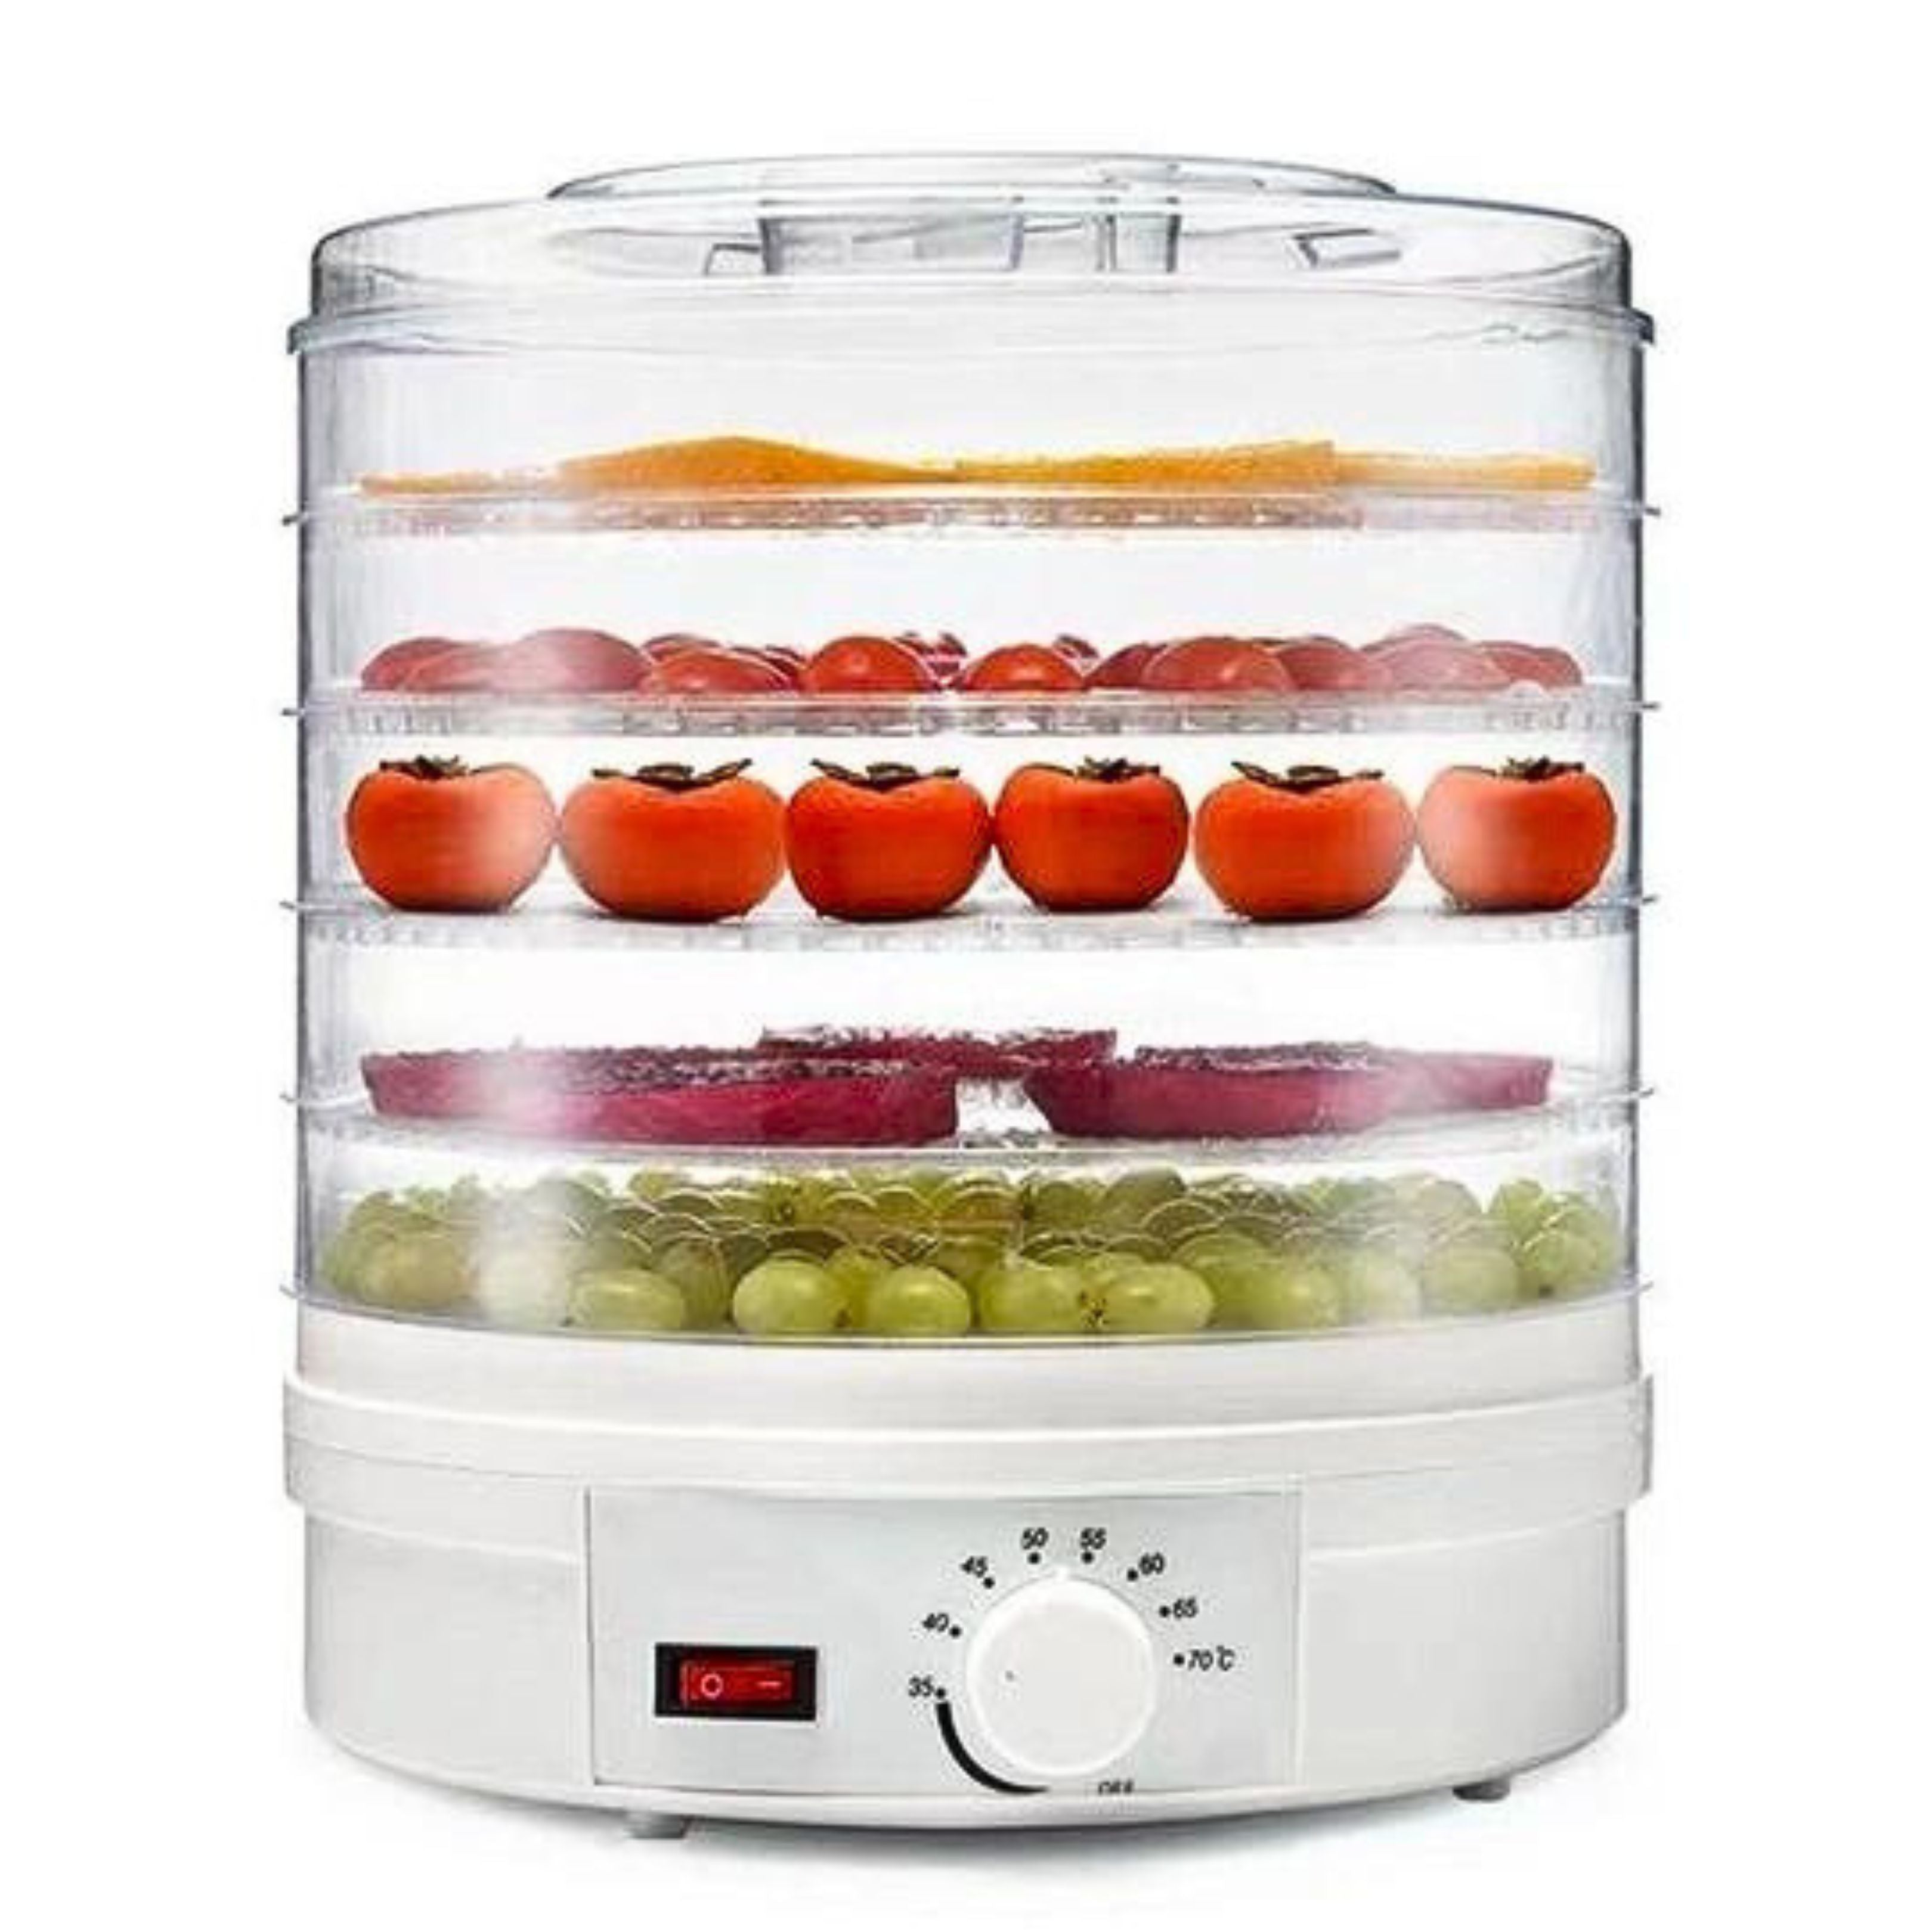 https://cdn.shopify.com/s/files/1/0494/4507/7148/files/5_Tier_Food_Dehydrator_White_Food_Dryer_Machine_with_Adjustable_Temperature_Control_for_Drying_Fruit_Meat_Vegetable_Multifunction_Kitchen_Dehydrator_Machine.jpg?v=1690471152